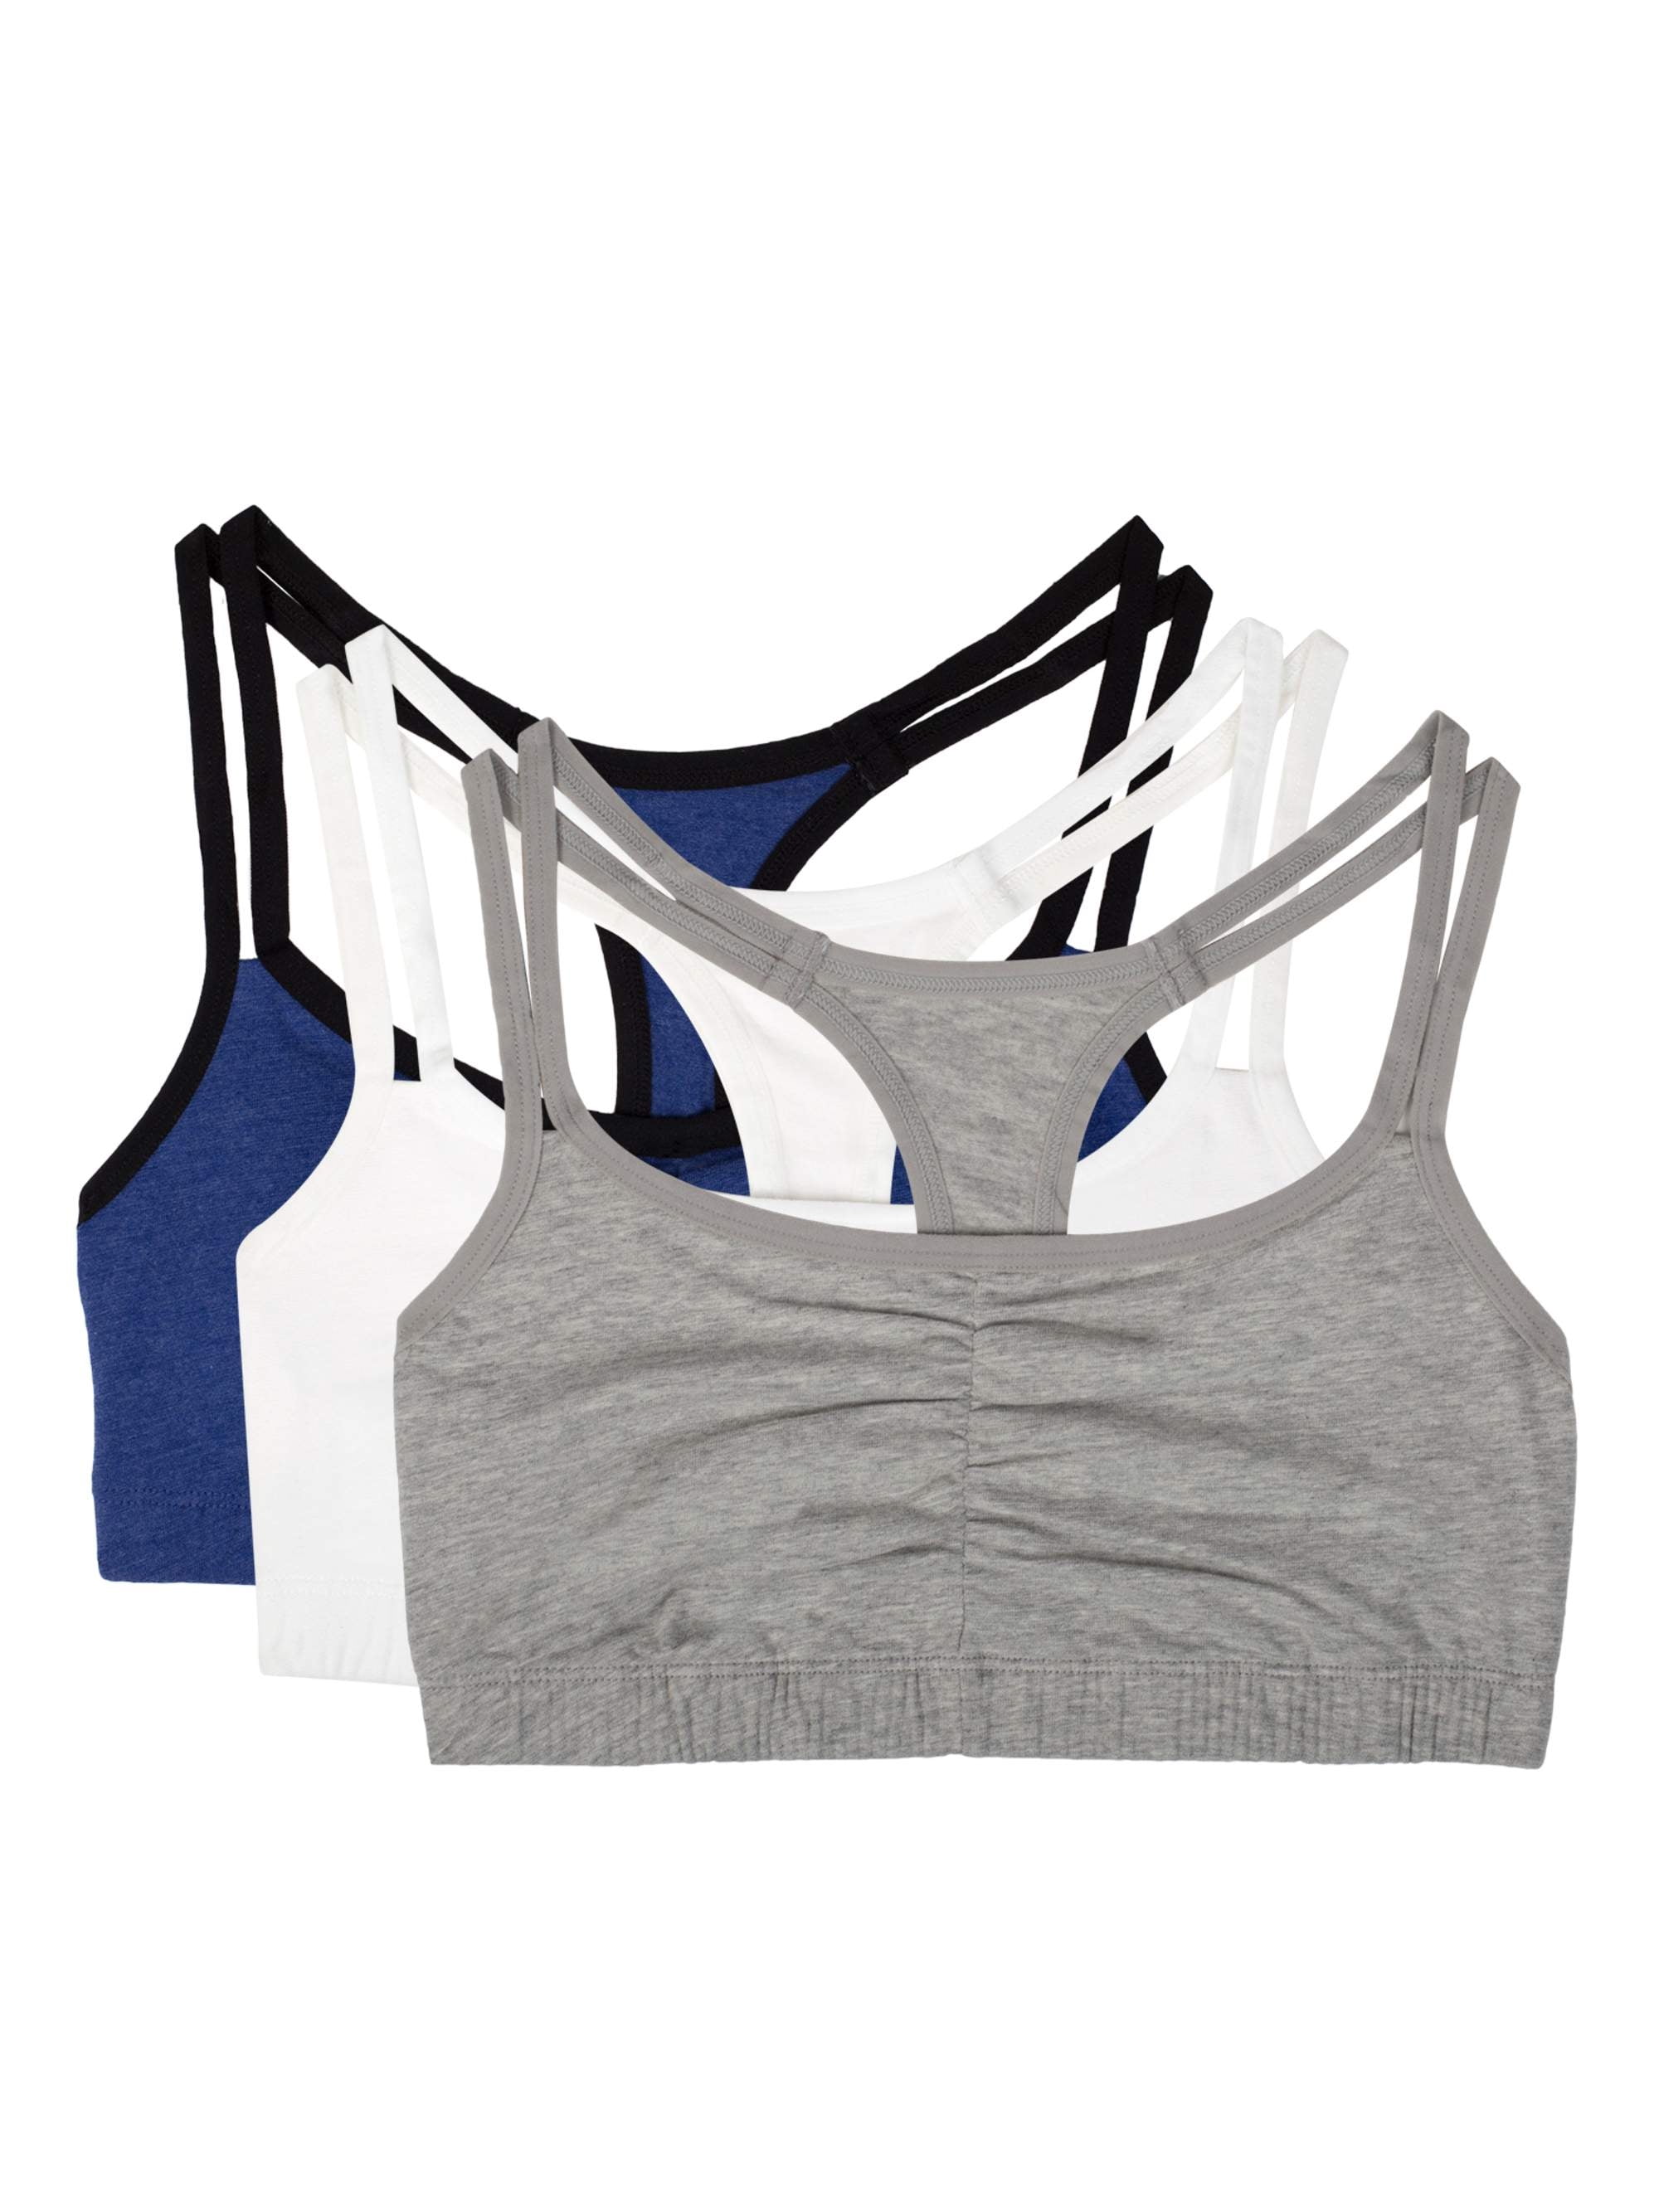 Fruit of the Loom GRAY COTTON SPORTS BRA SIZE 34 - $15